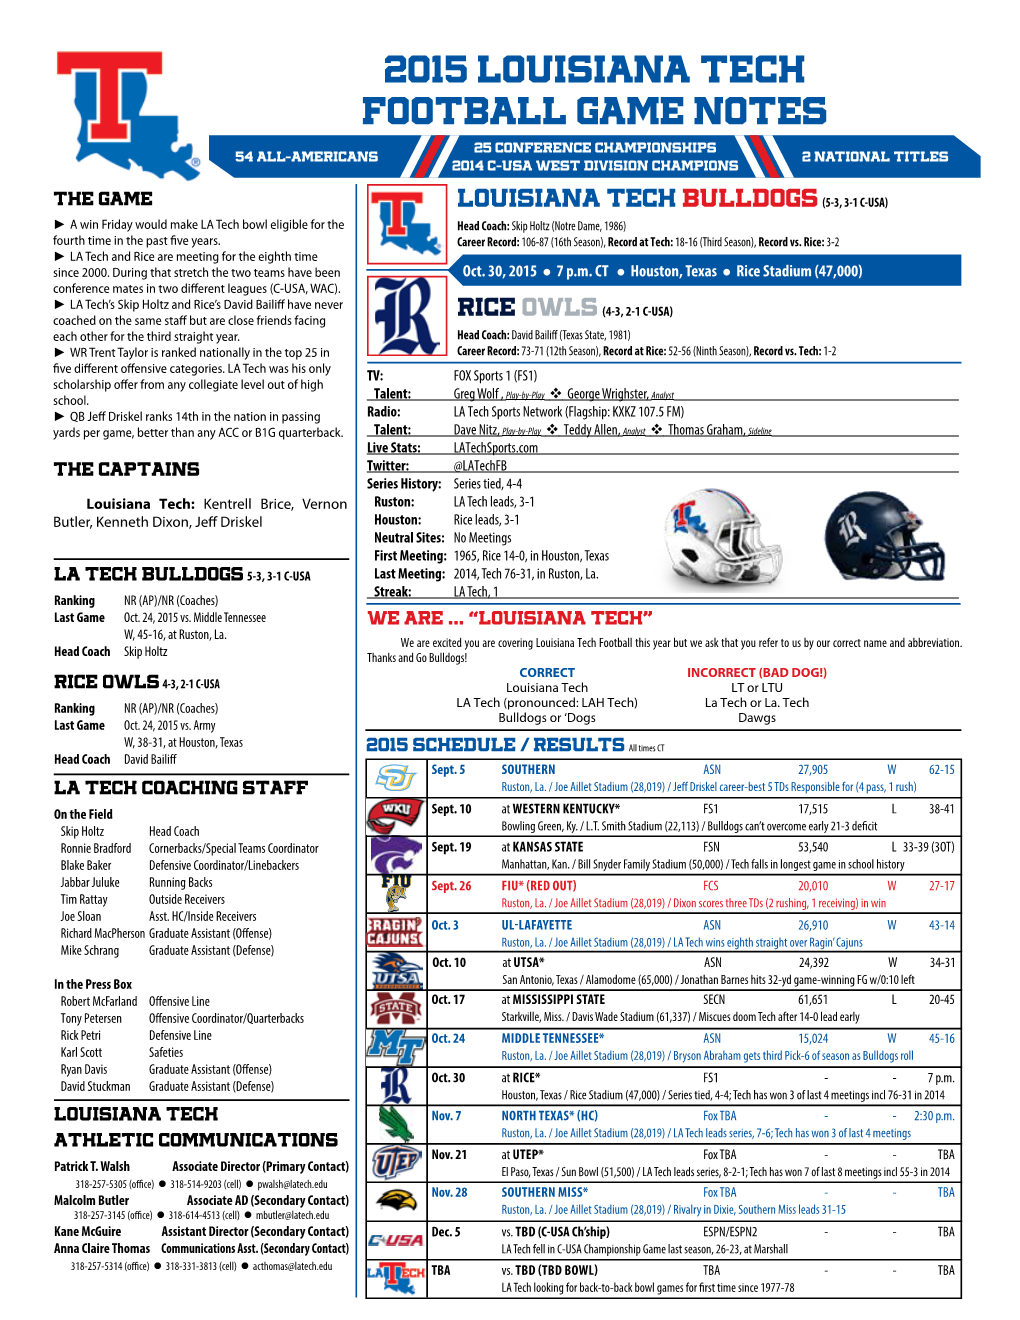 2015 Louisiana Tech Football Game Notes 25 Conference Championships 54 All-Americans 2 National Titles 2014 C-Usa West Division Champions